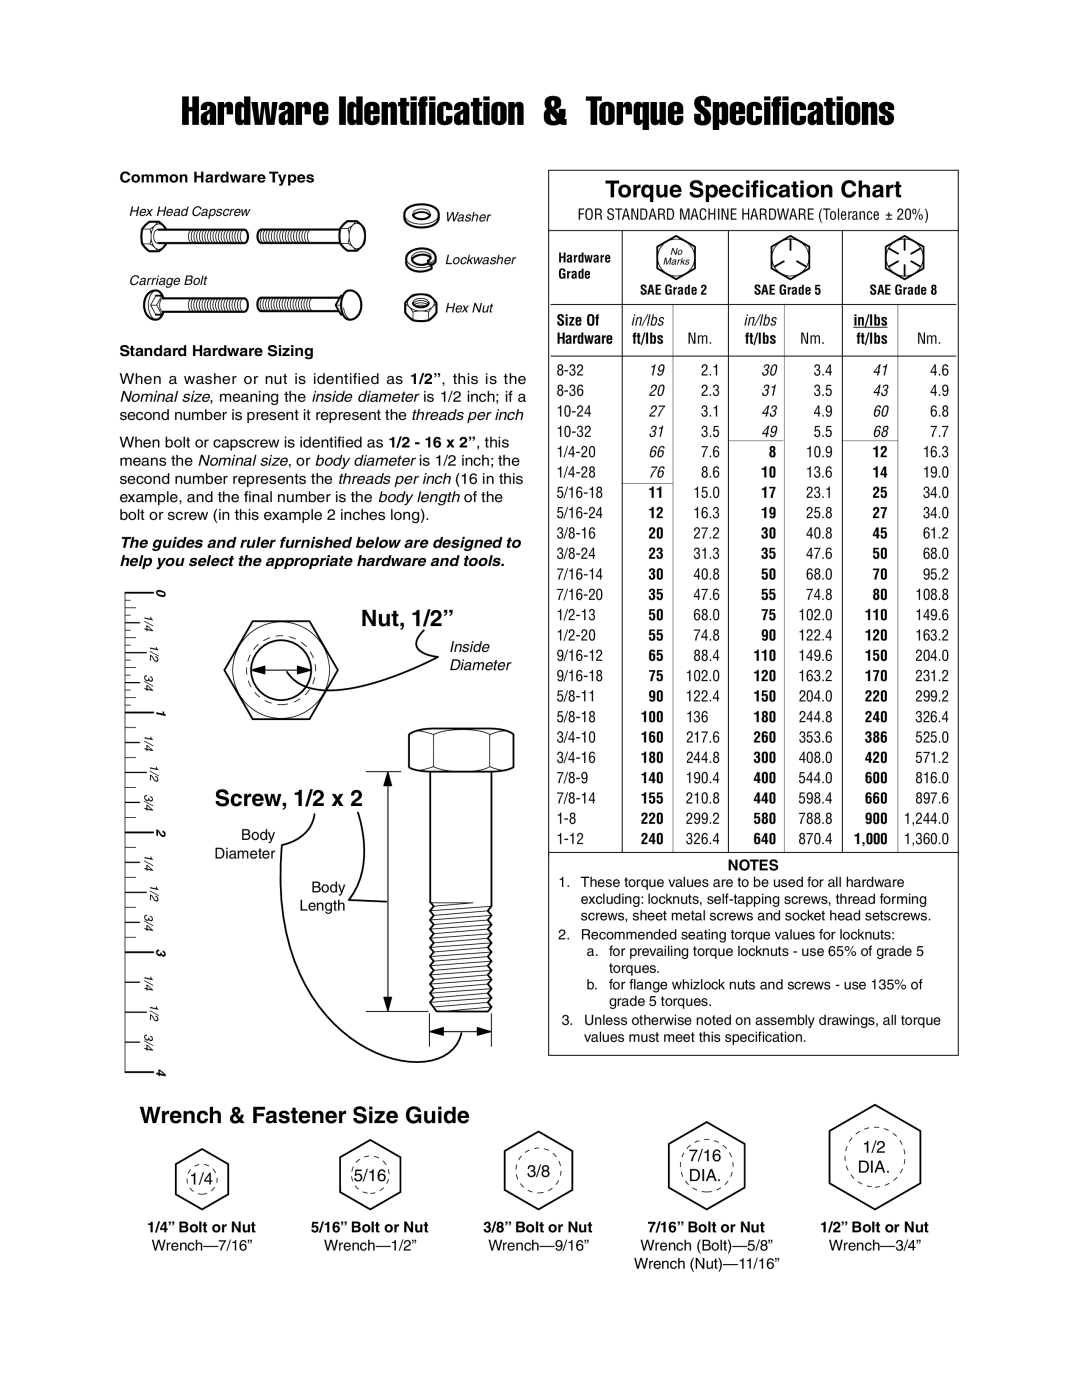 Snapper 1694580 Wrench & Fastener Size Guide, Common Hardware Types, Standard Hardware Sizing, 1/4” Bolt or Nut, Nut, 1/2” 